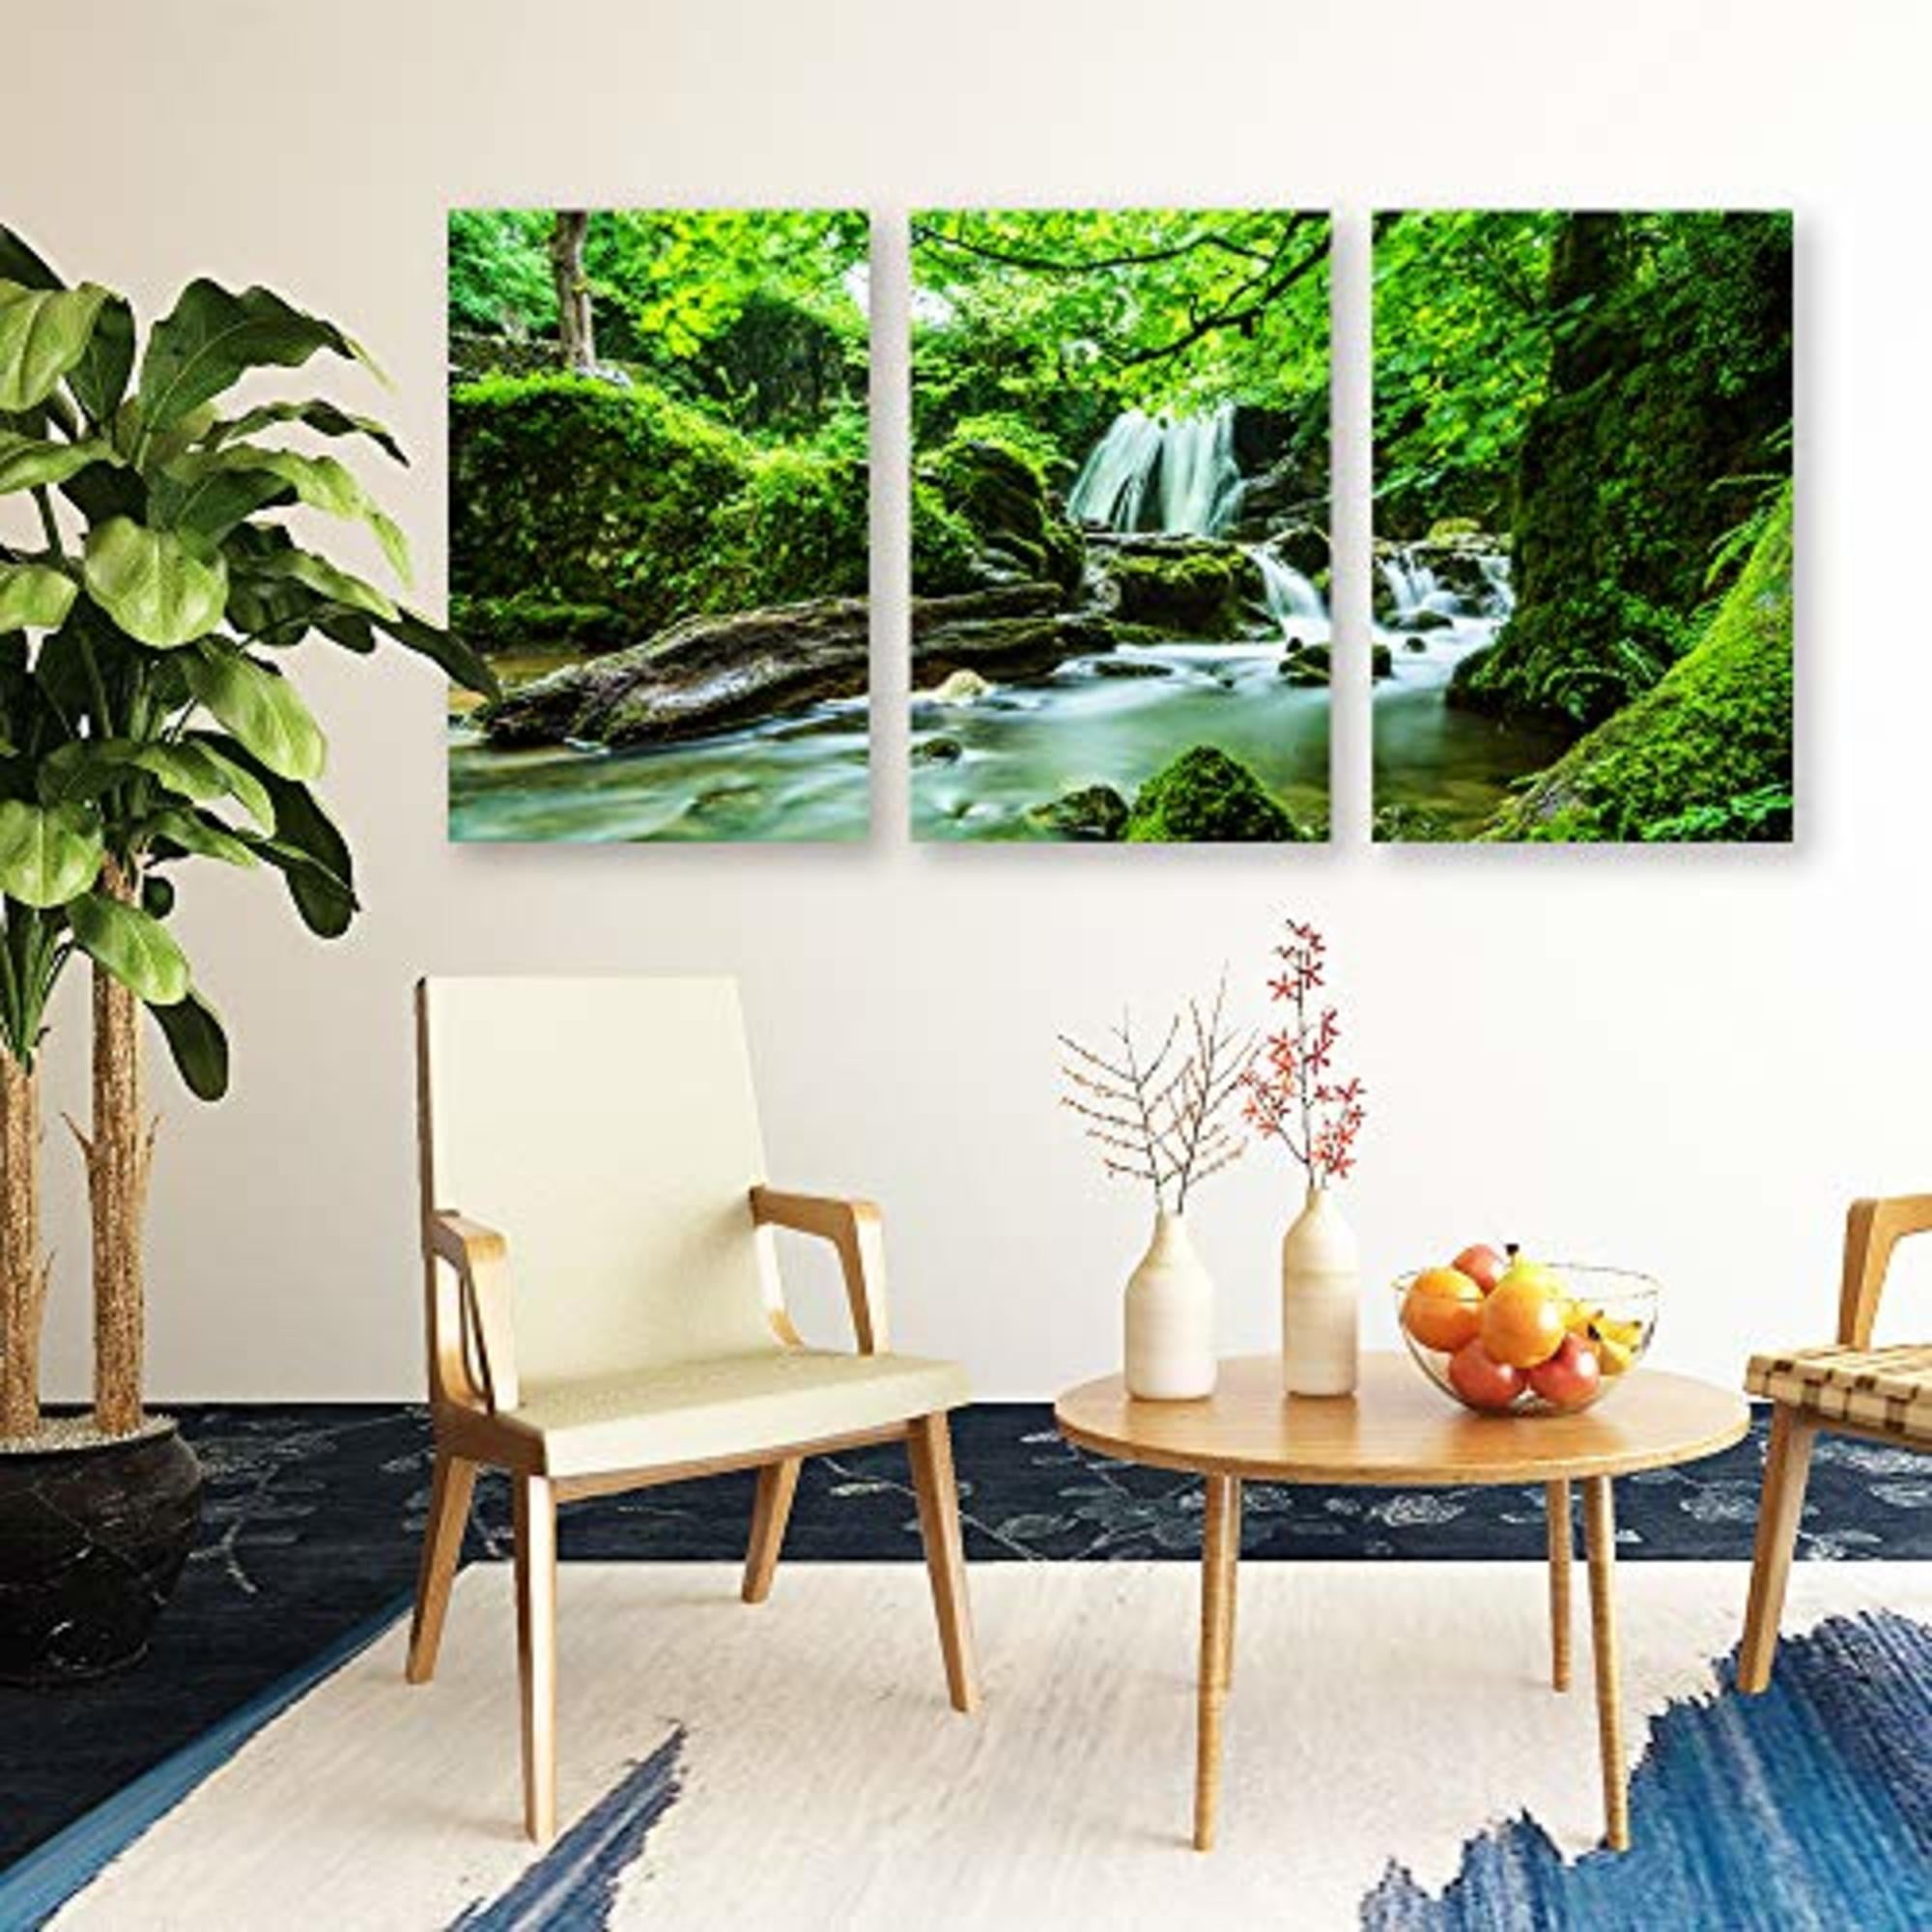 IDEA4WALL Piece Nature Canvas Wall Art Waterfall in Forest Canvas Prints  Modern Home Wall Decor, 24